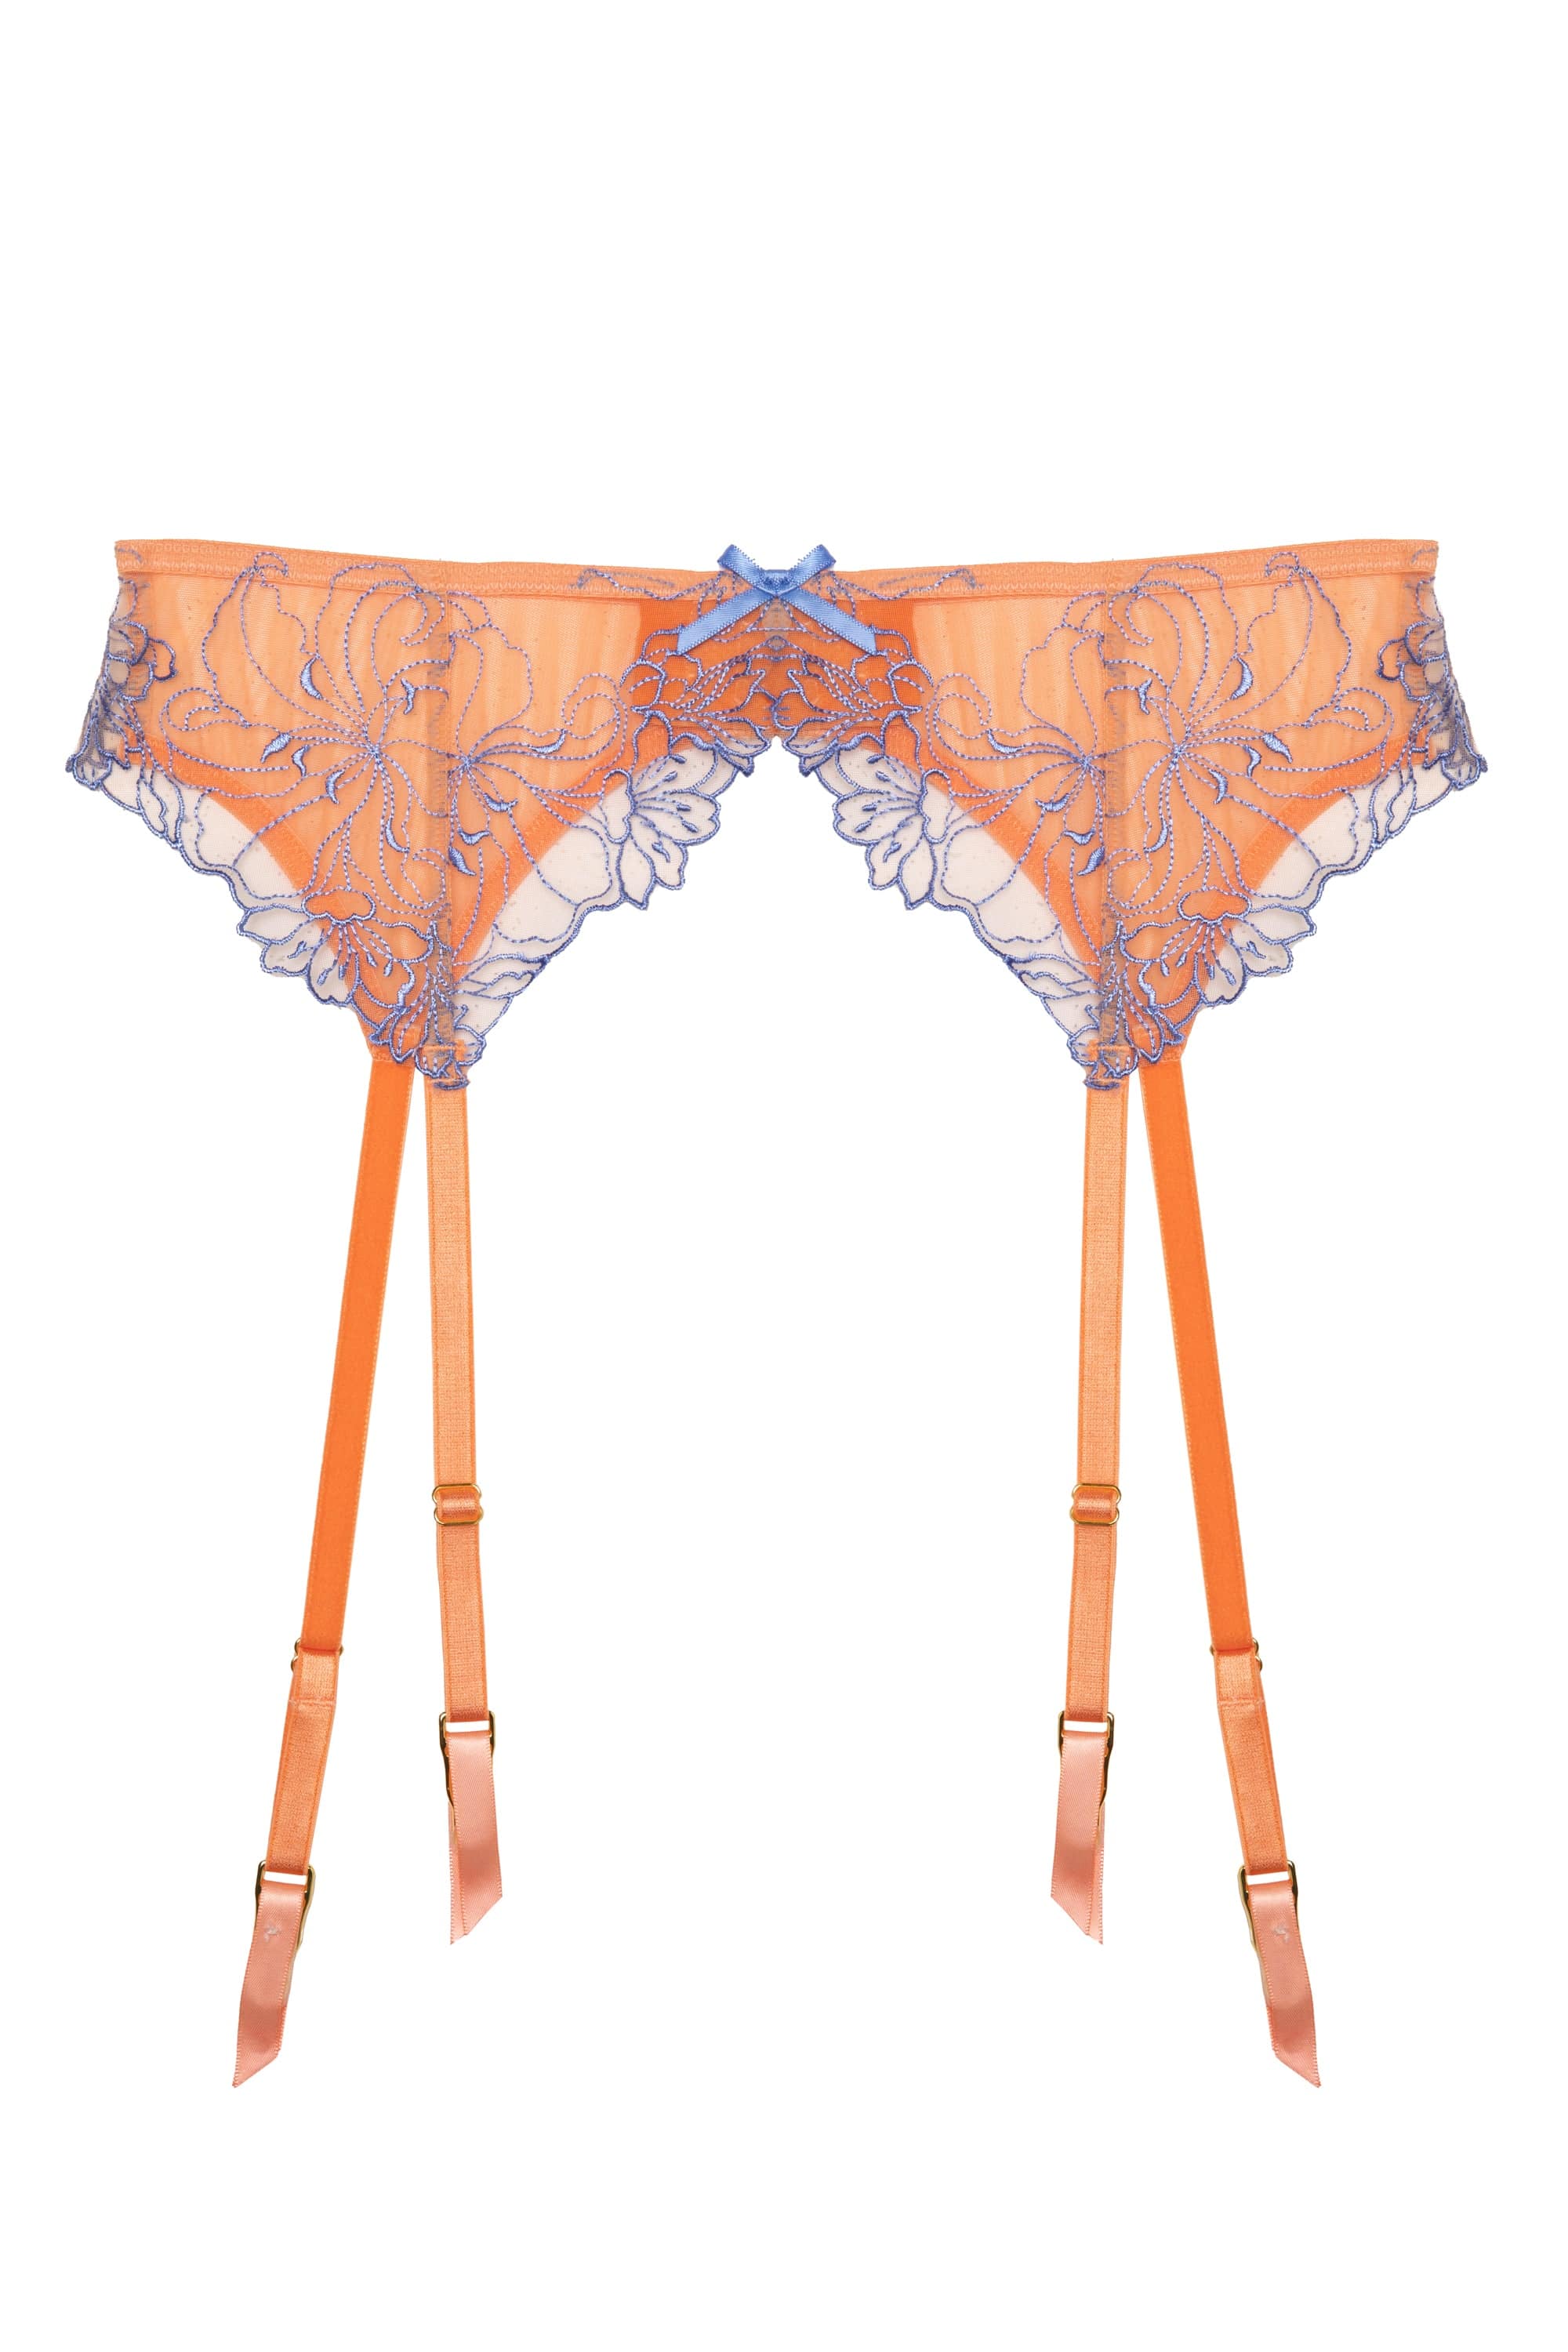 Cutout of orange mesh suspender with lacey blue-lilac detailing on the front.